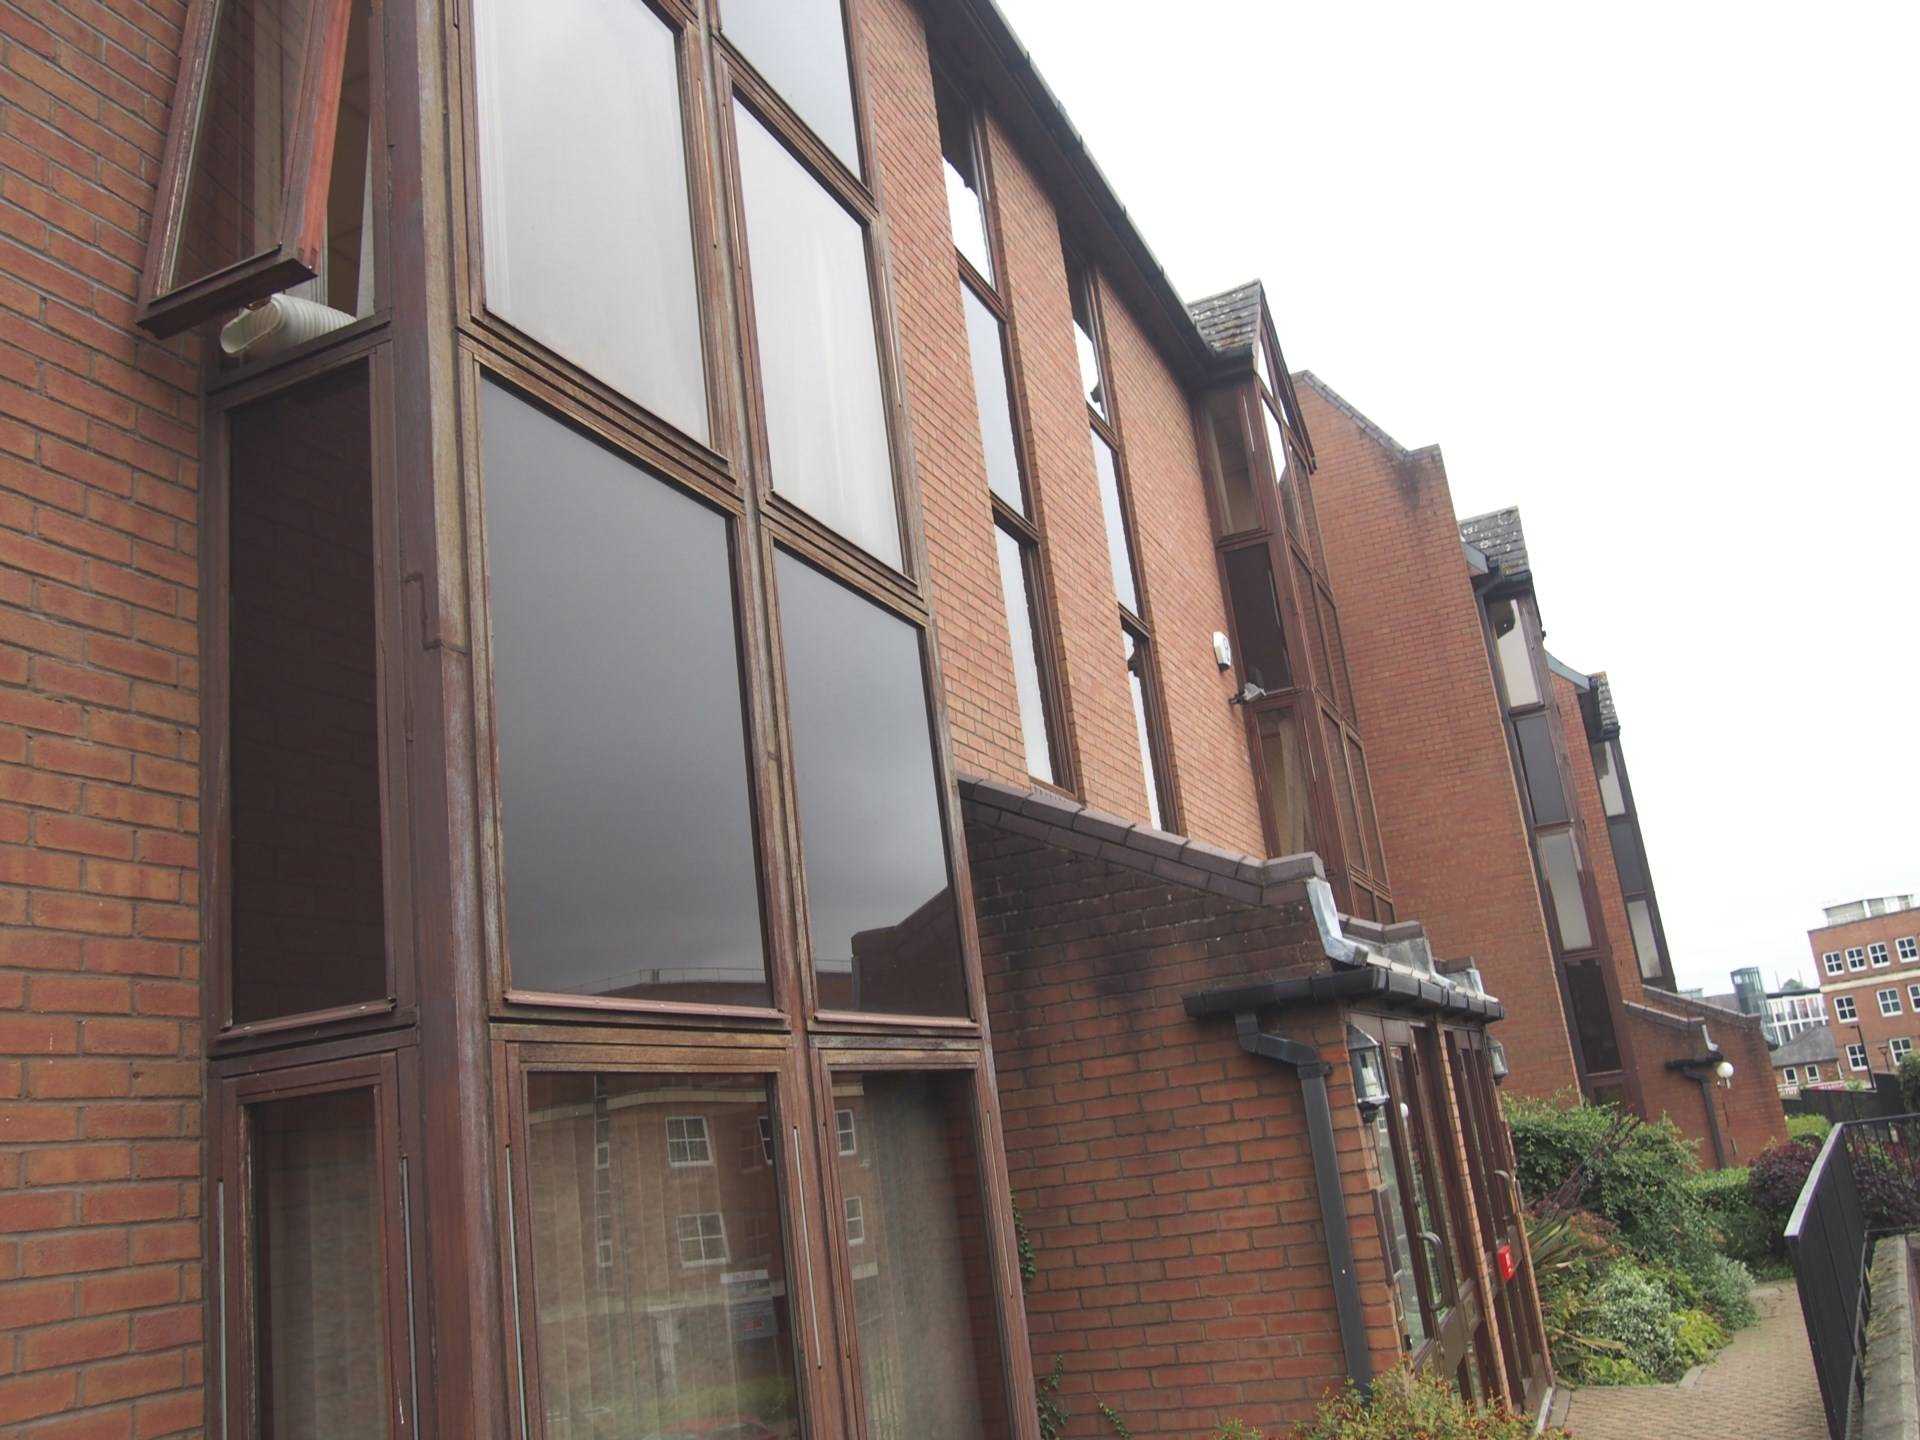 1 bed Flat for rent in High Wycombe. From Eden Sales & Lettings - High Wycombe